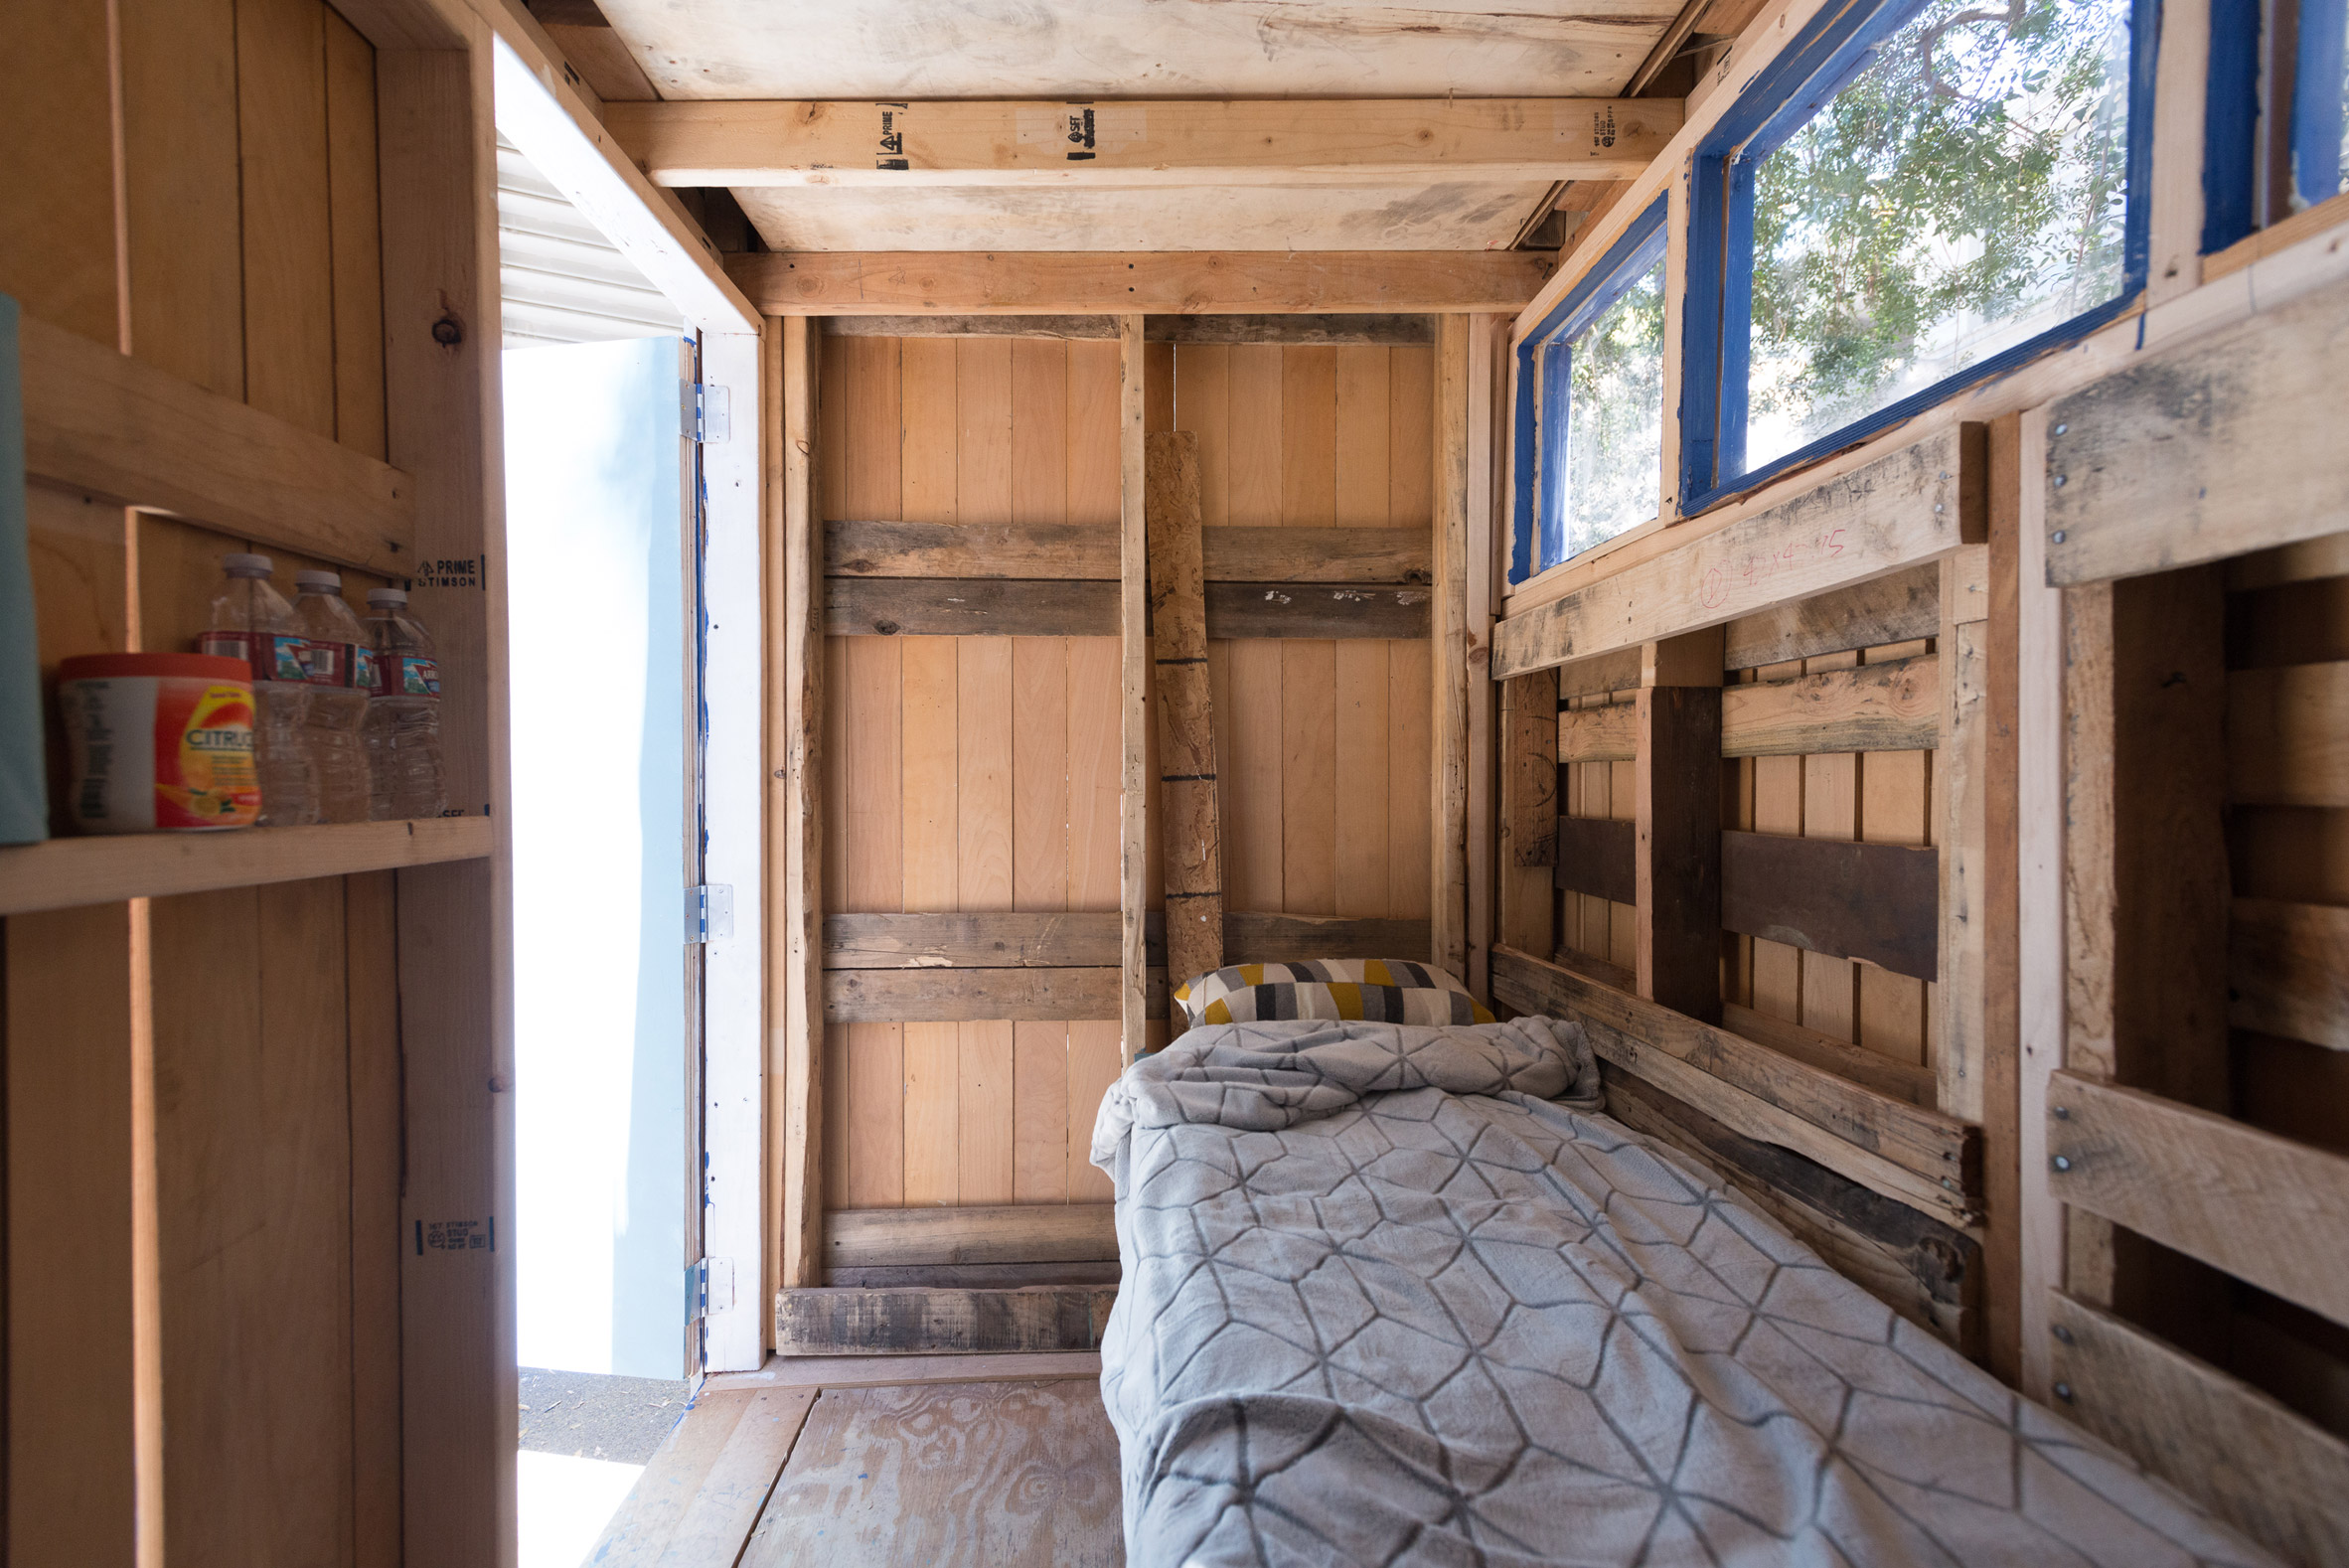 Tiny Home - interior with bed, shelves and windows